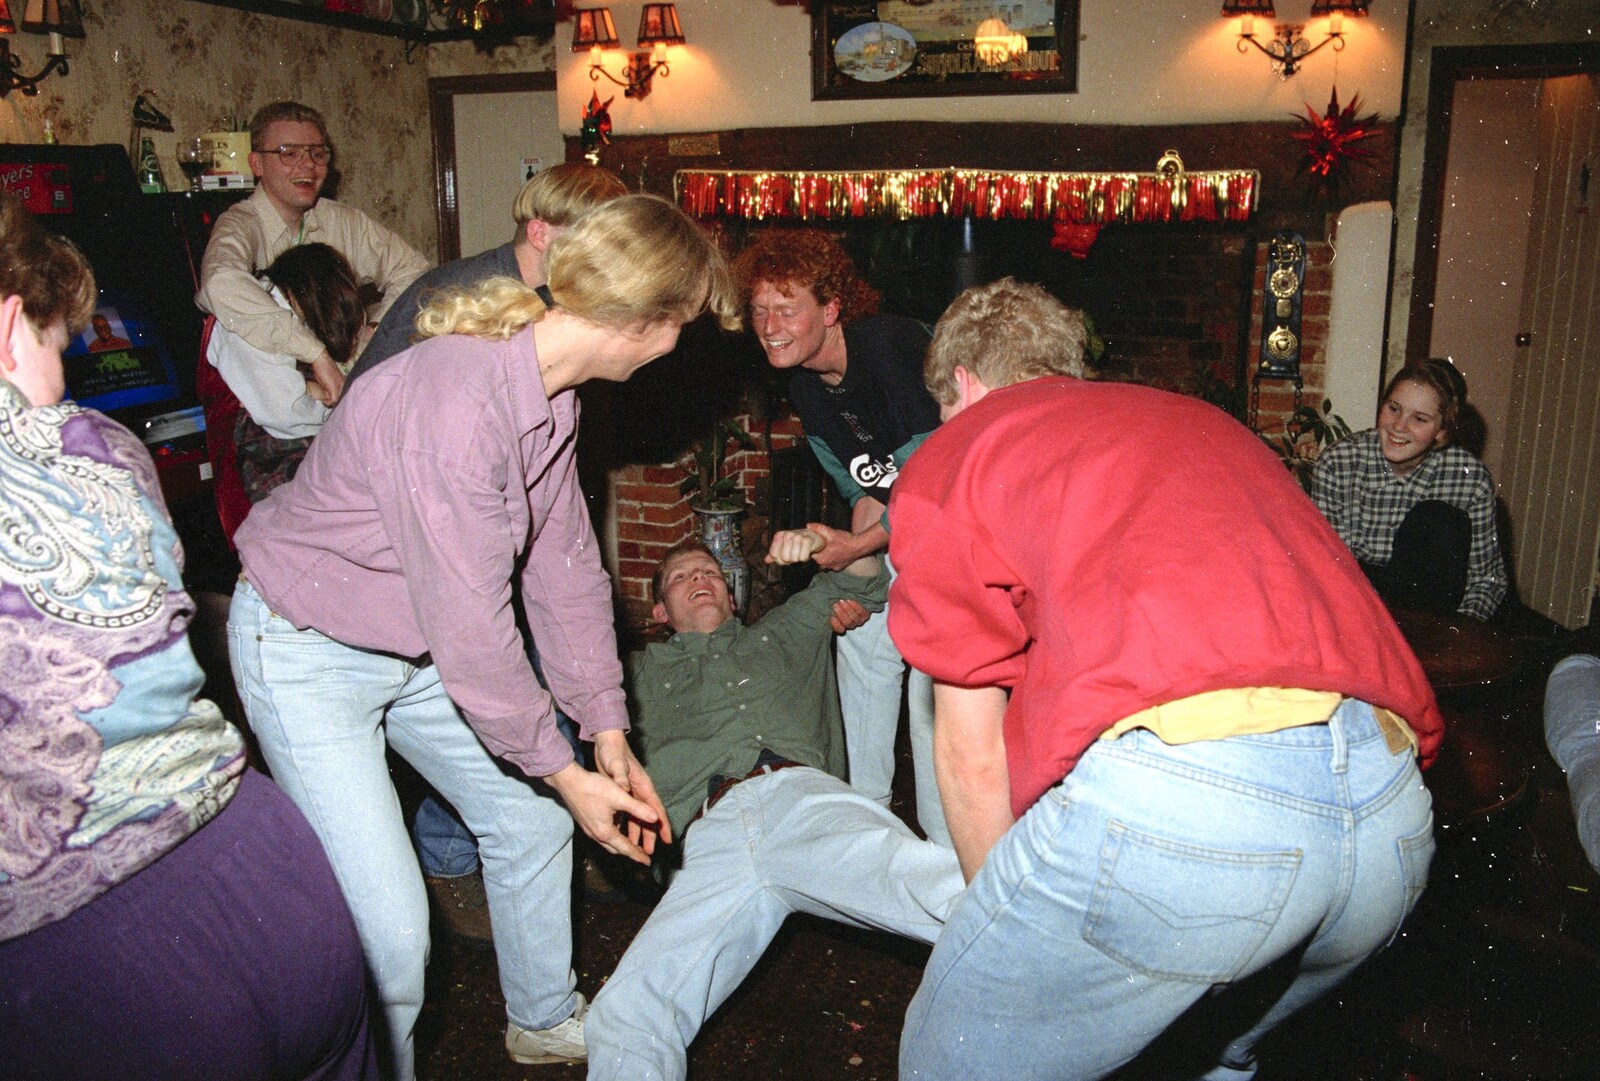 Mikey gets some sort of bumps from New Year's Eve at the Swan Inn, Brome, Suffolk - 31st December 1994